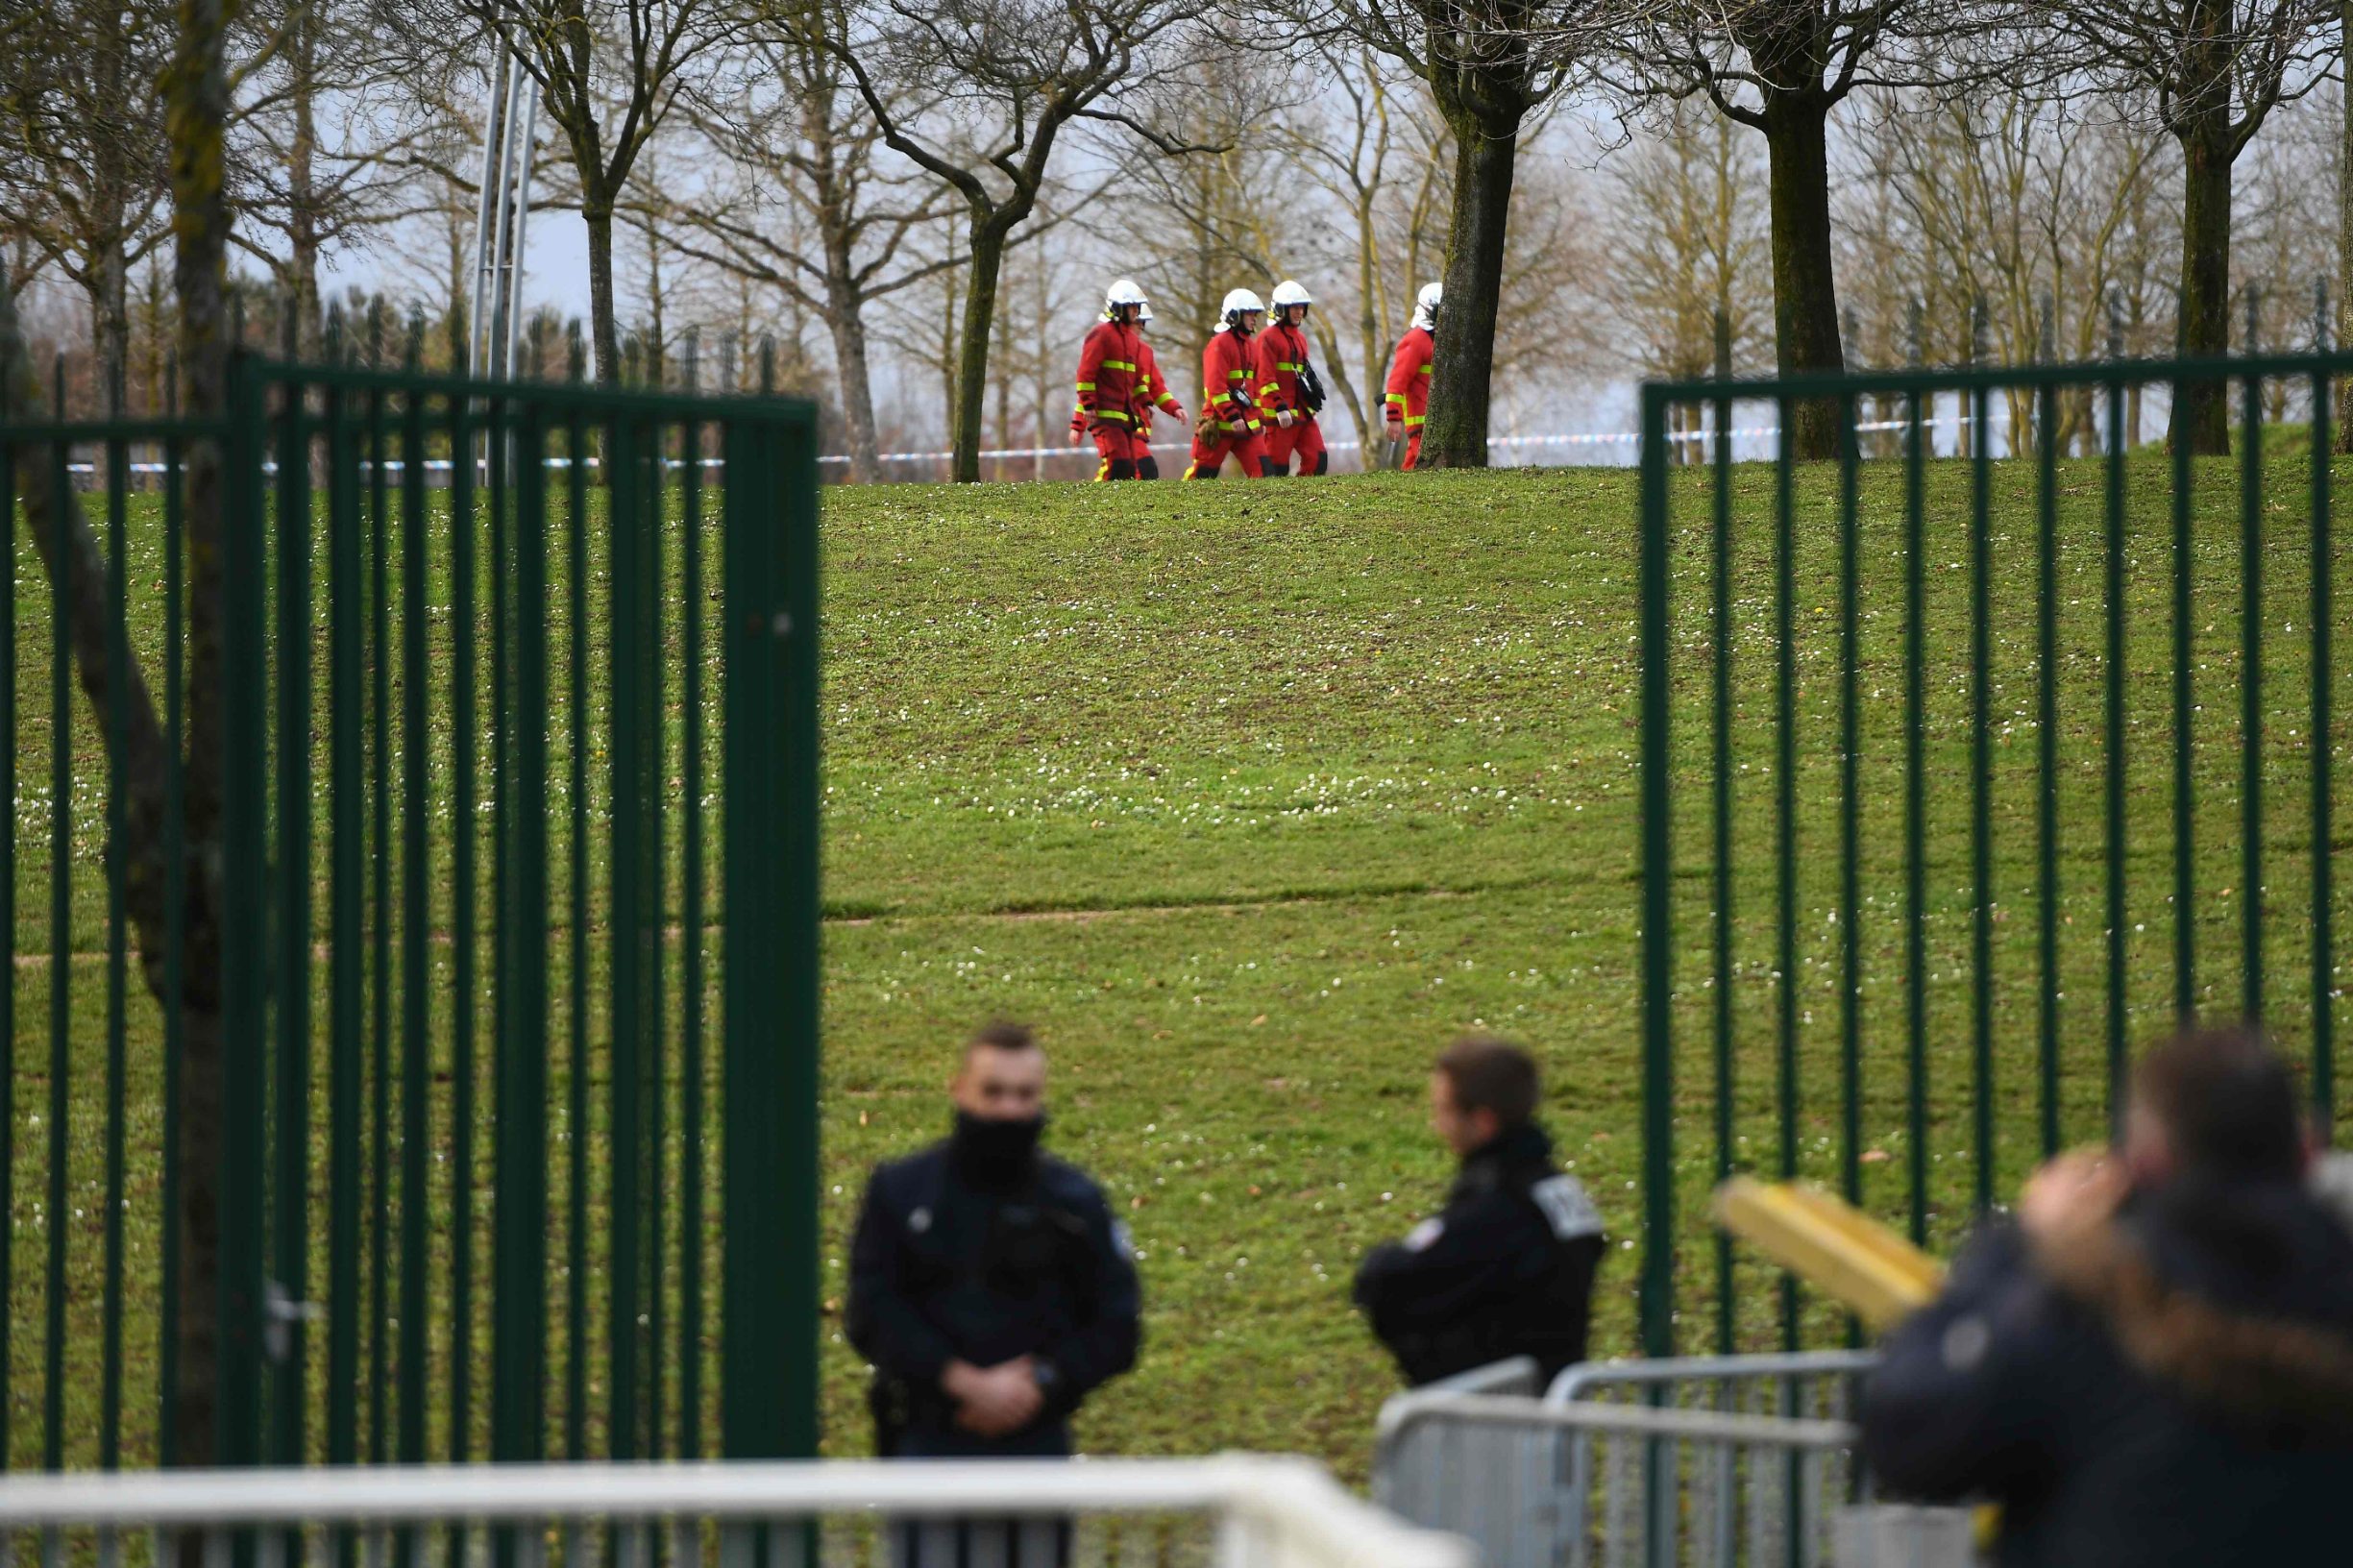 Police and firefighters gather in a park in the south of Paris' suburban city of Villejuif on January 3, 2020 where police shot dead a knife-wielding man who killed one person and injured at least two others. - The man had attacked 